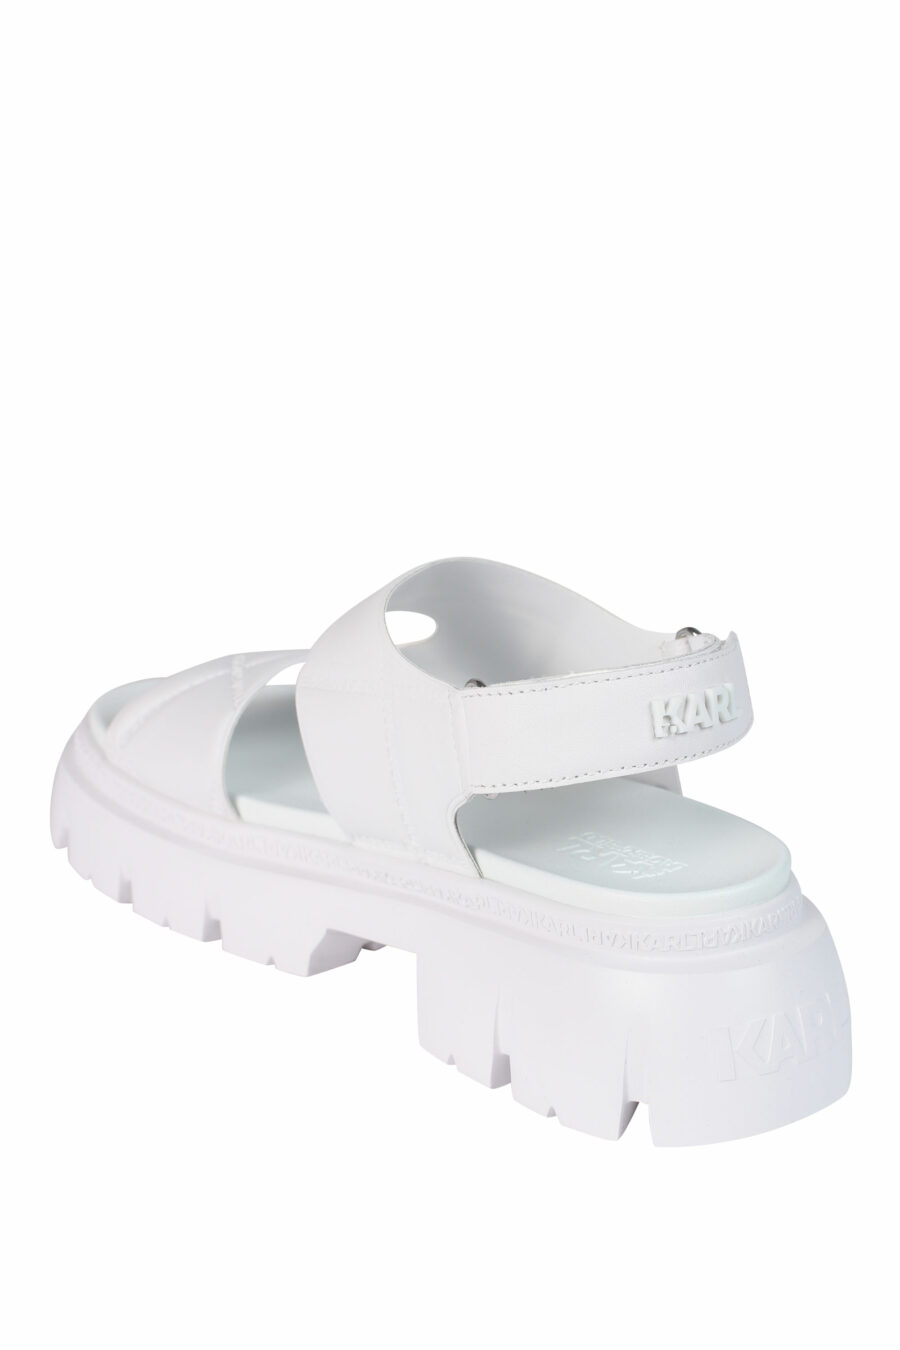 White cushioned crossover sandals with platform and logo - 5059529245473 4